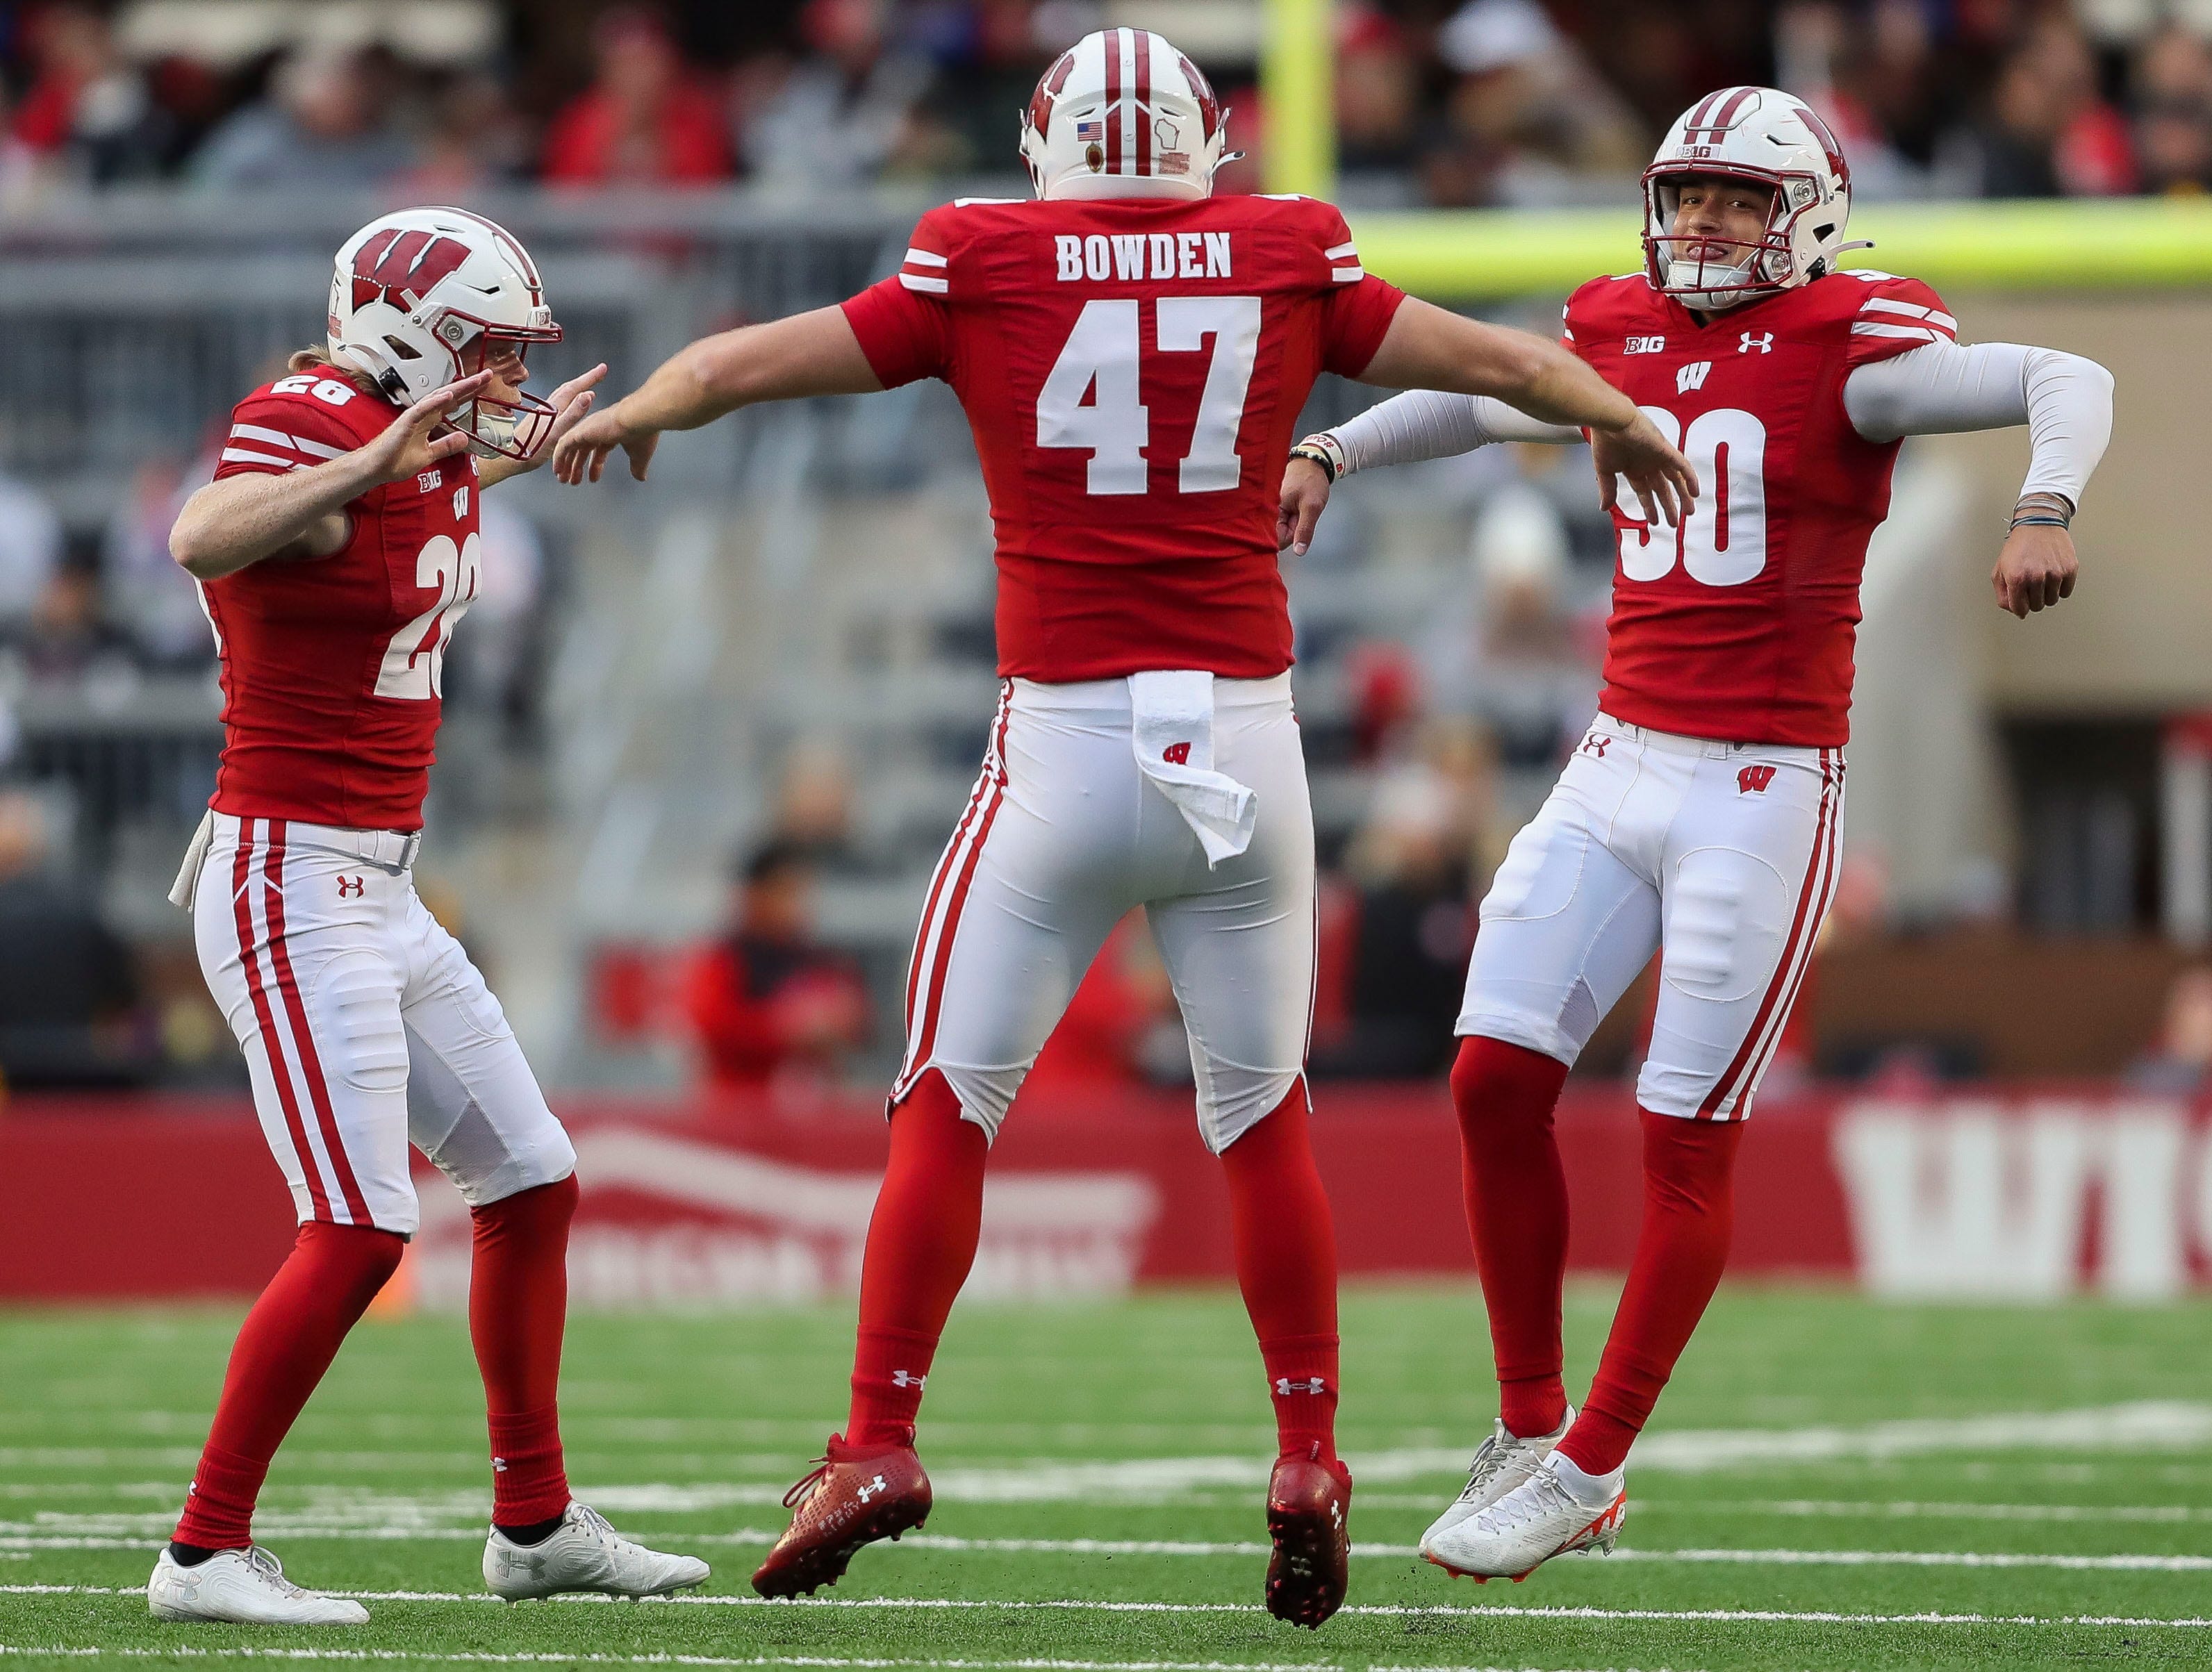 packers signing wisconsin long snapper peter bowden following 2024 draft